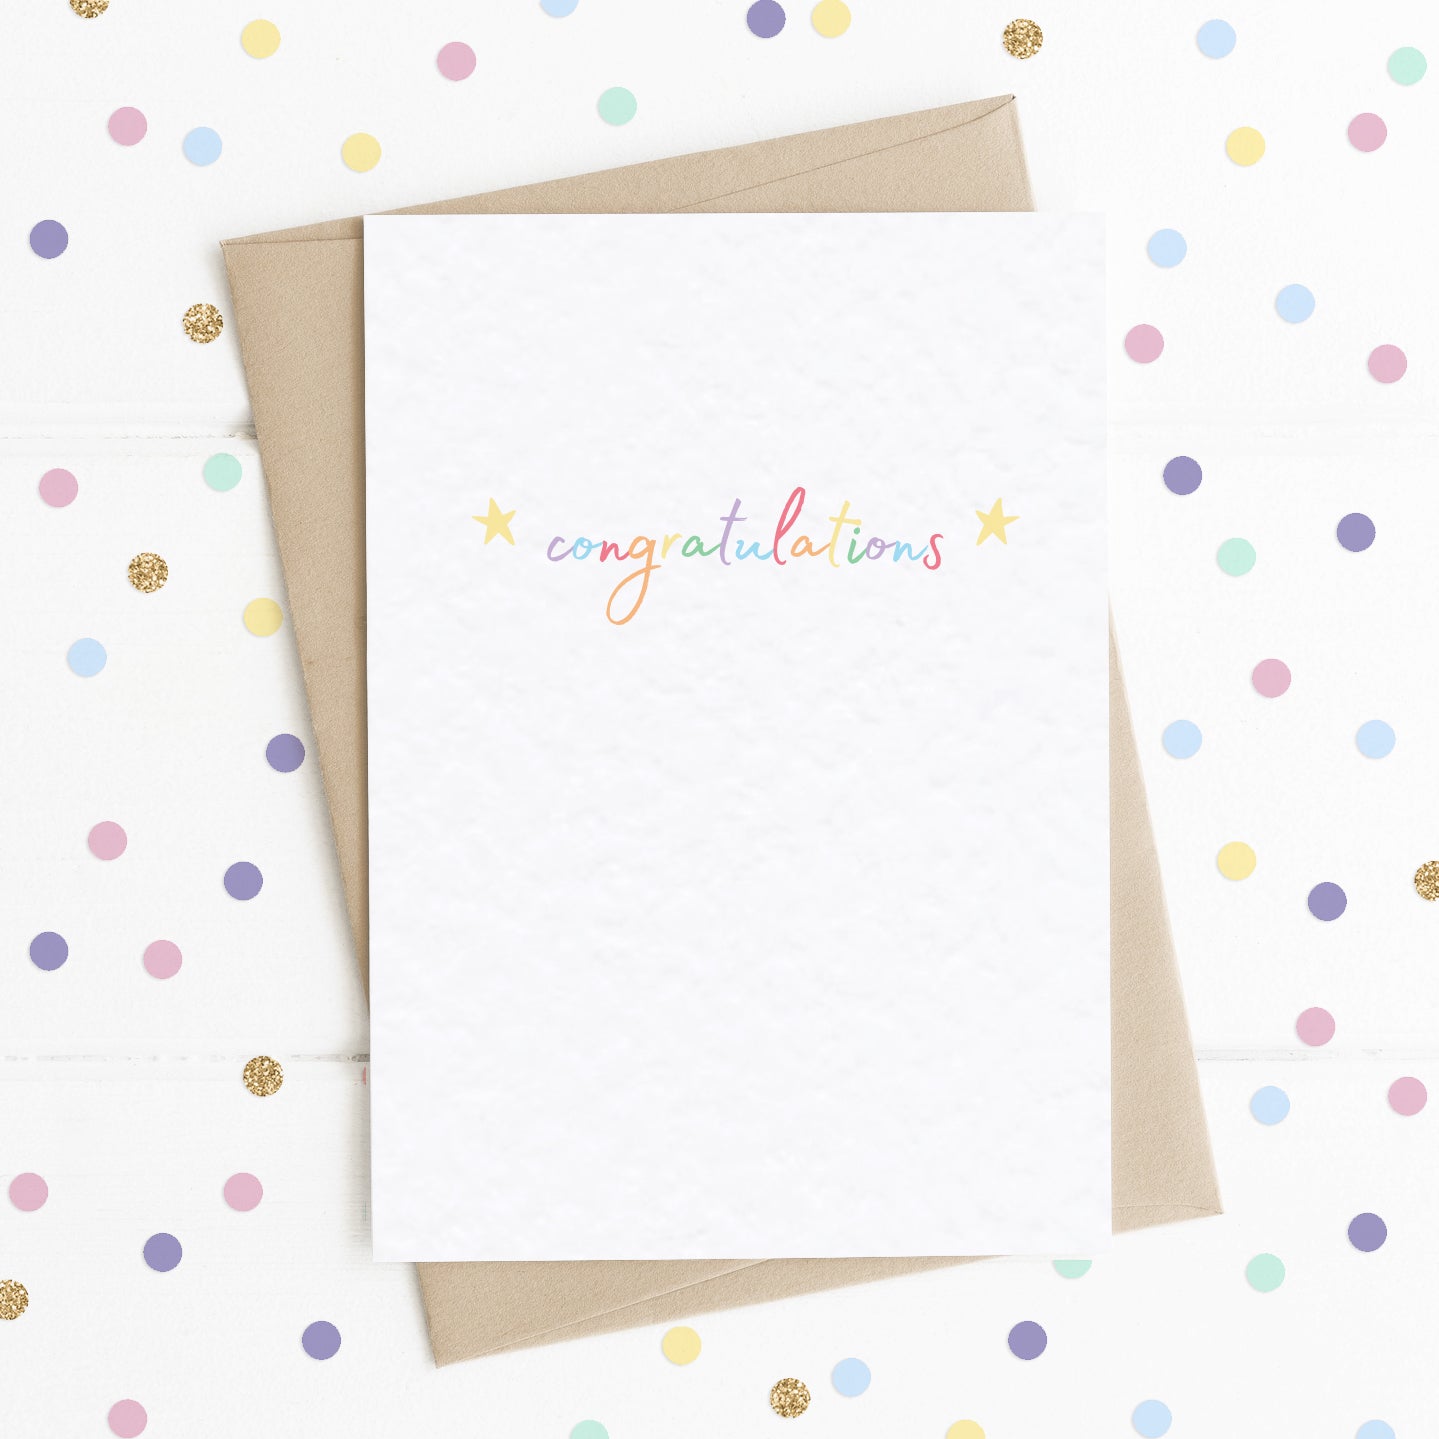 A cute A6 celebration card with the message "Congratulations" in colourful rainbow type, with two yellow stars either side.